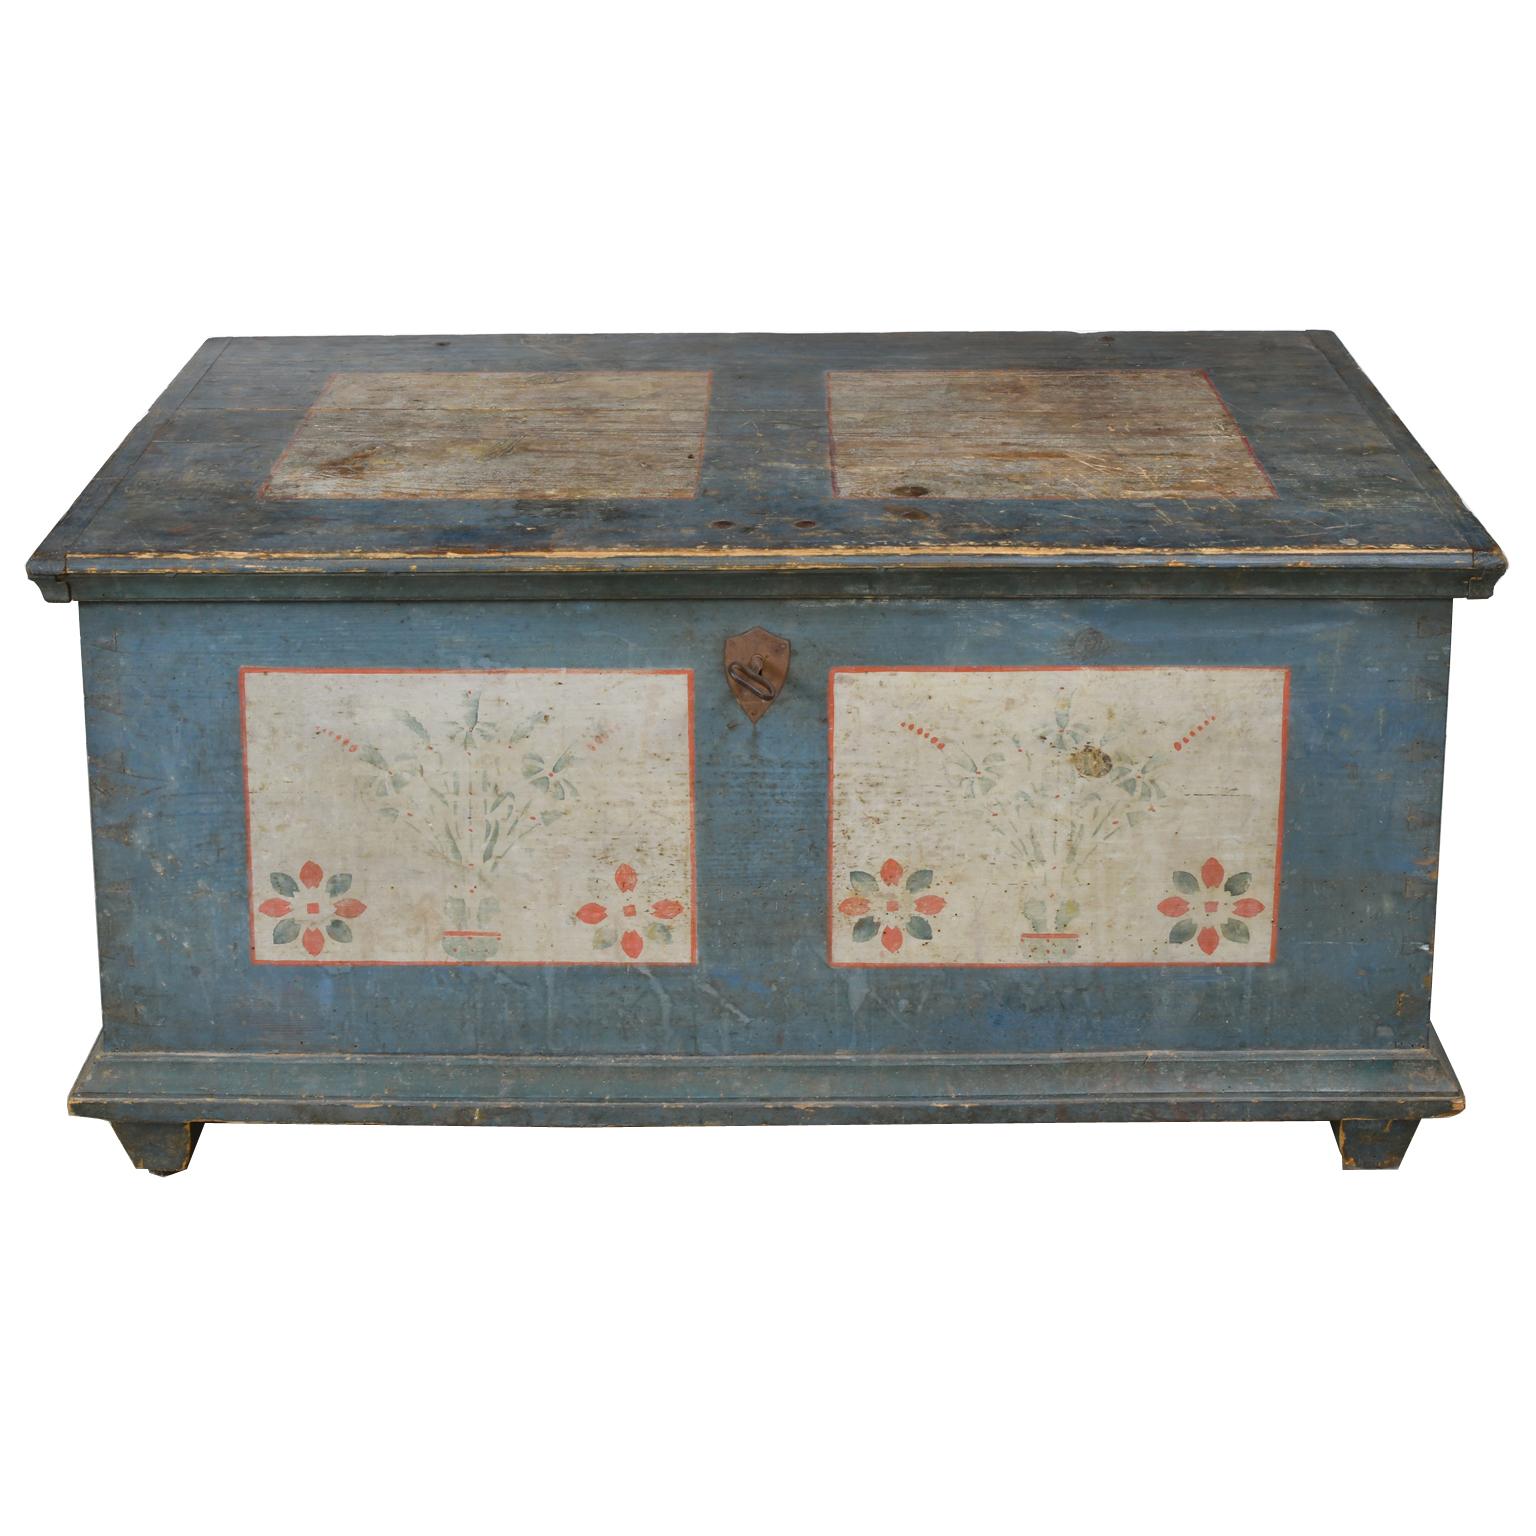 A very beautiful wedding chest with the original painted finish with blue background and square white panels on the hinged top, front and sides decorated with floral design in blue and orange tones. Chest opens to a small lidded compartment and